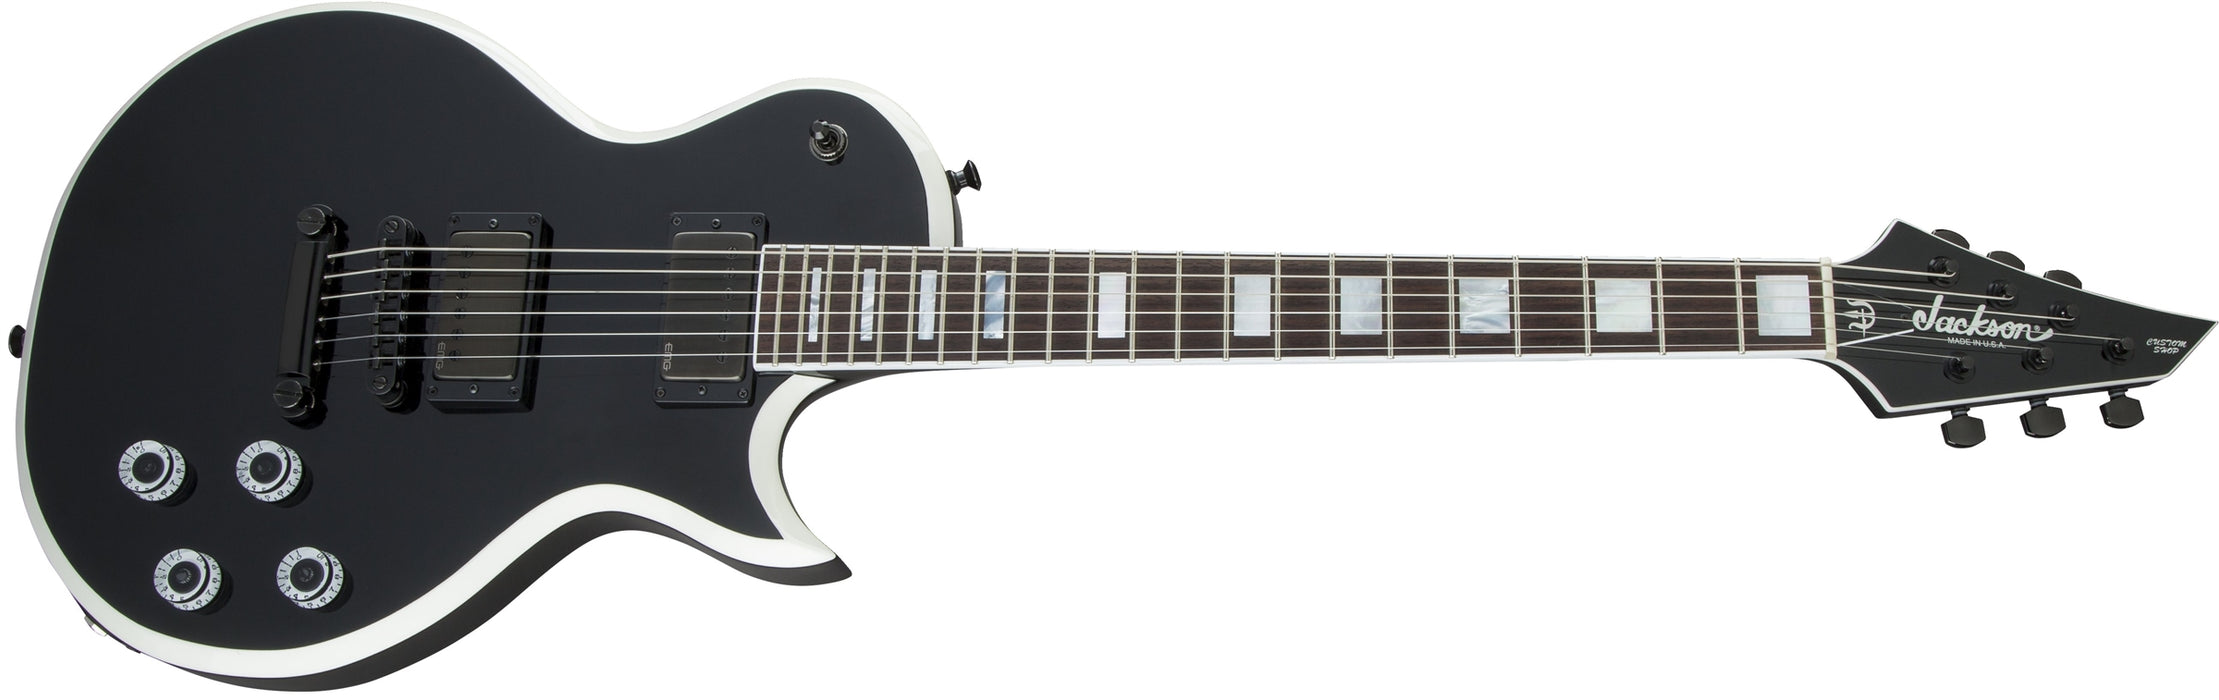 Jackson USA Signature Marty Friedman MF-1, Rosewood Fingerboard, Gloss Black with White Bevels